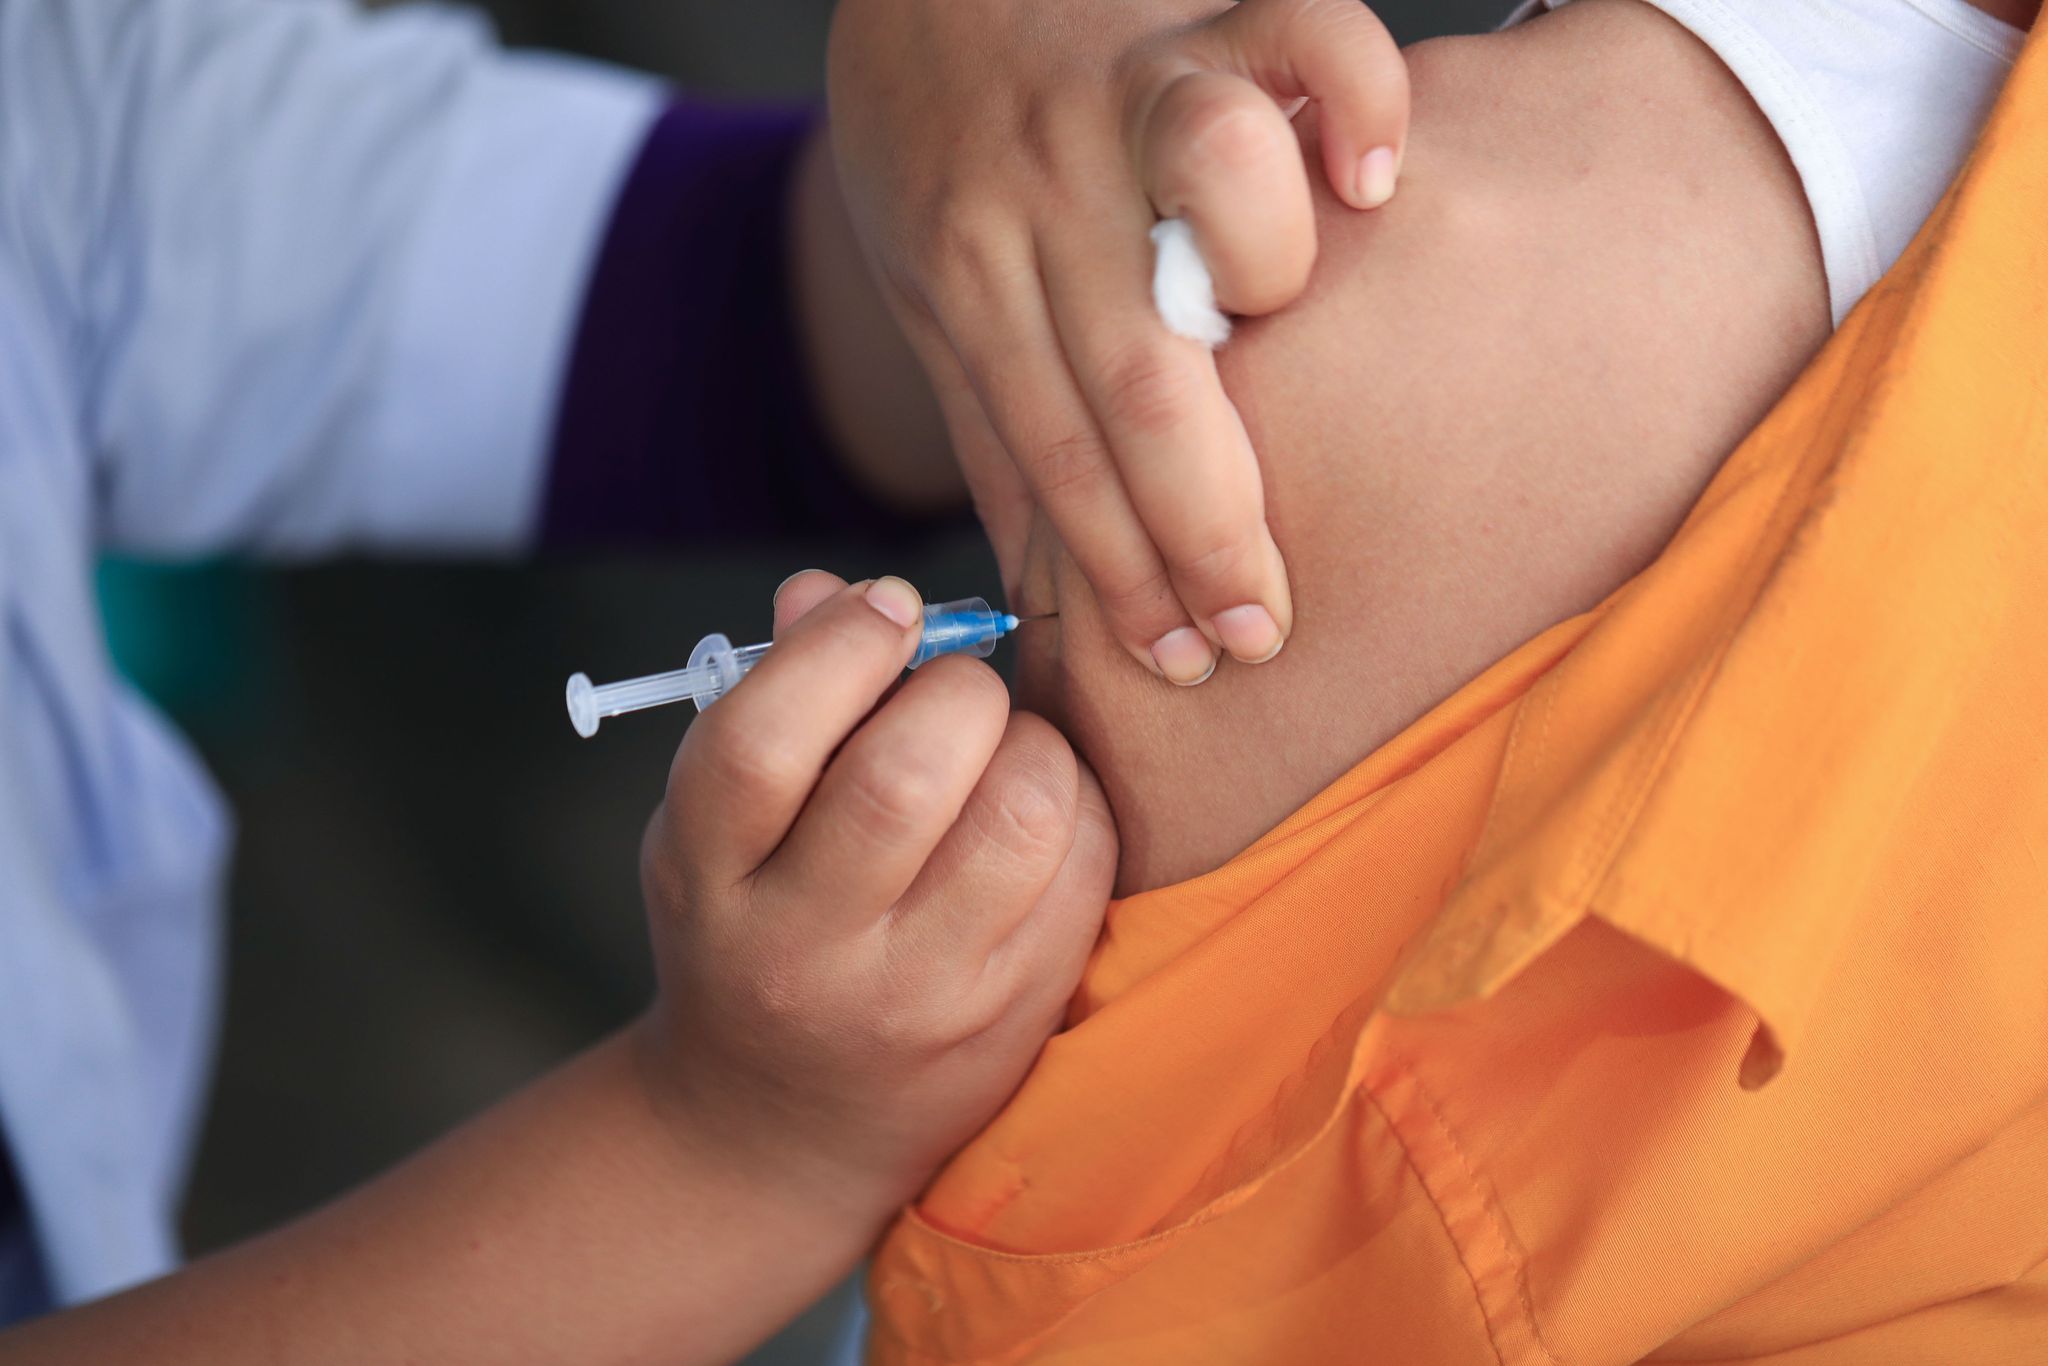 Over 40,000 left out children administered vaccines